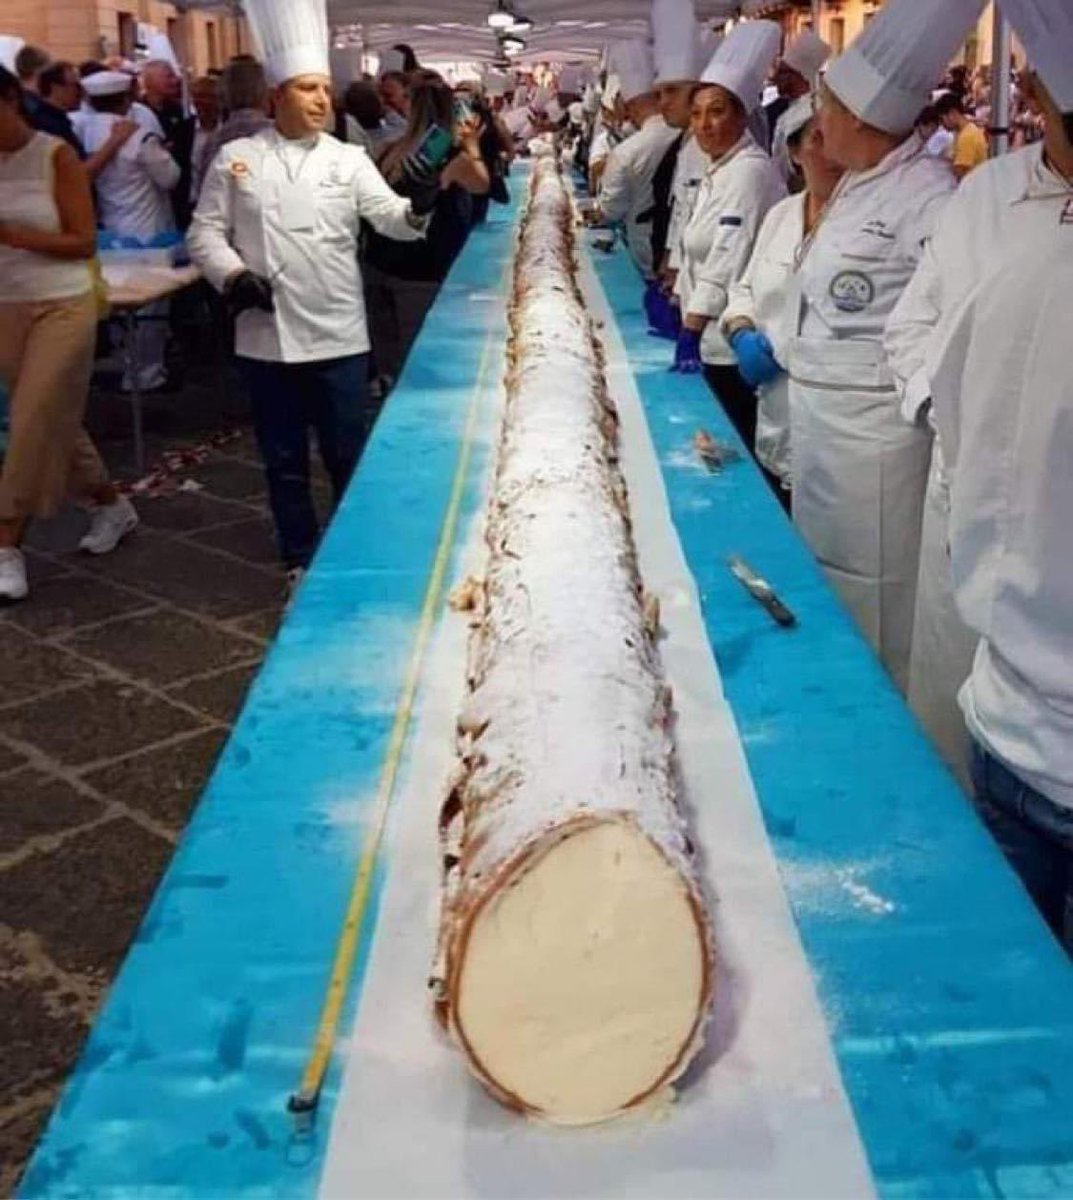 Here is a photo of the largest cannolo in the entire world, made in Caltanissetta, Sicily. It destroyed the previous record in Guinness World Records. The large and spectacular sweet was made by Sicilian pastry chefs, including master pastry chef Lillo Defraia.